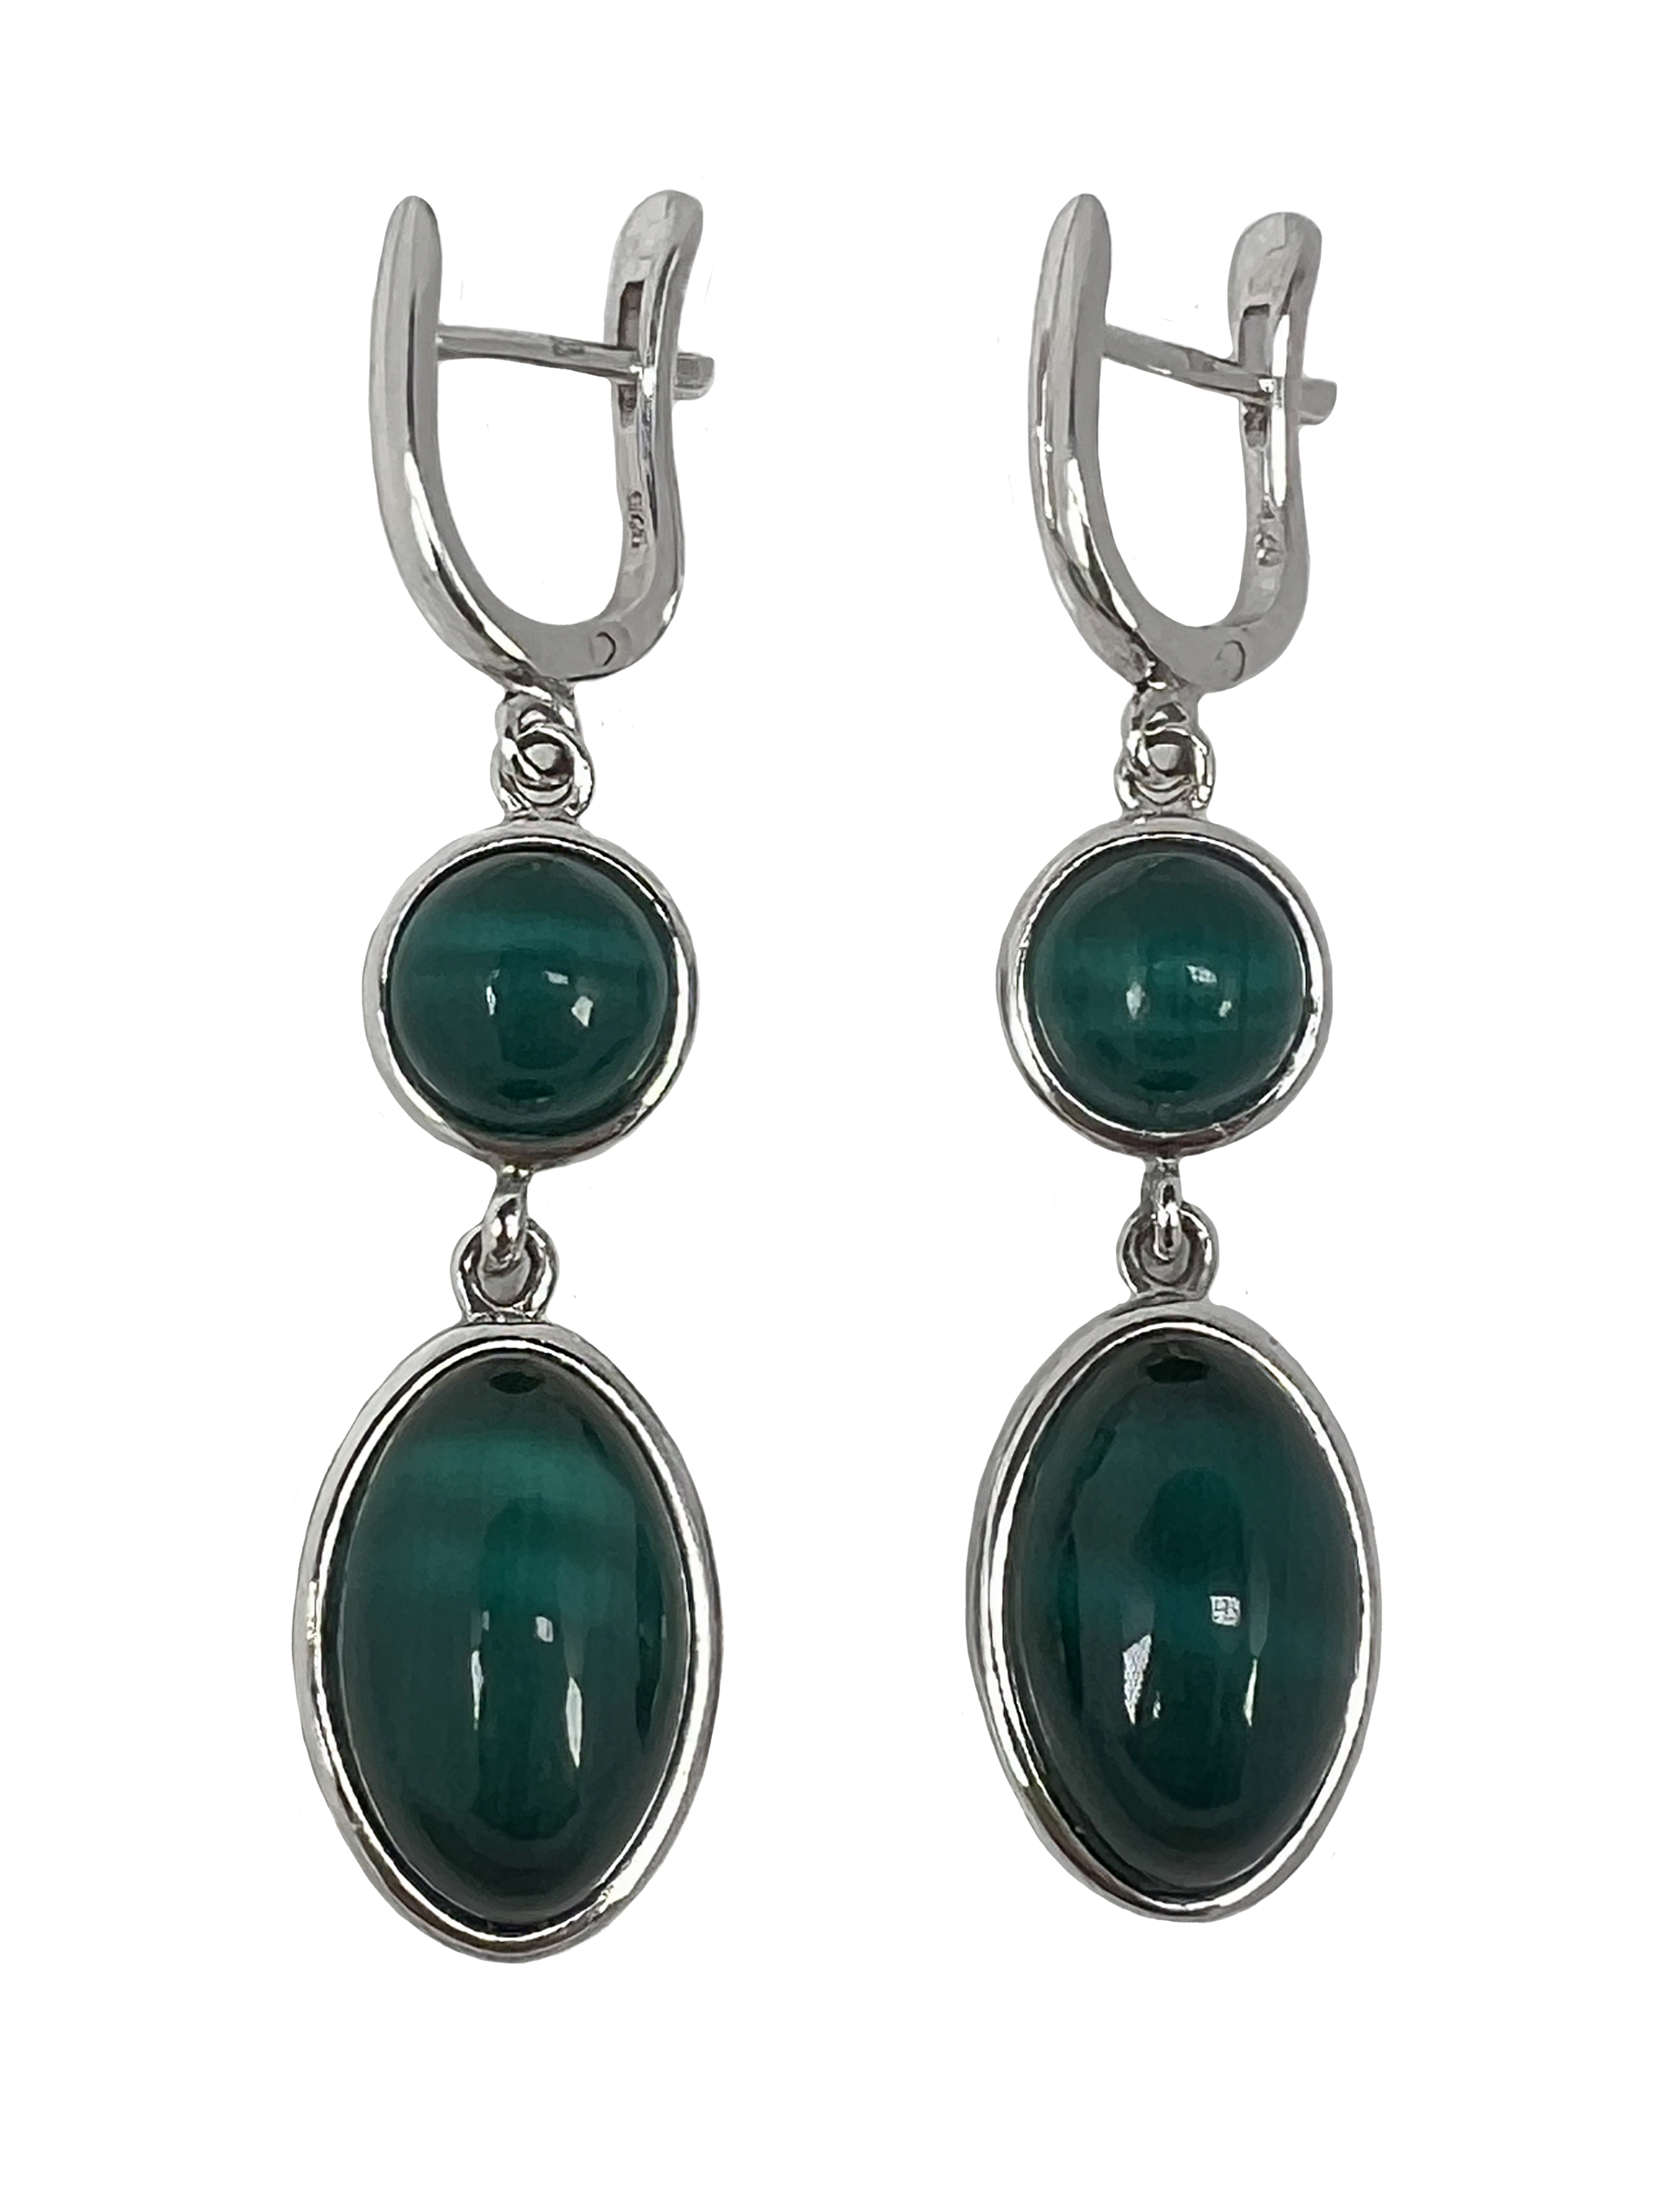 Silver earrings with green stones